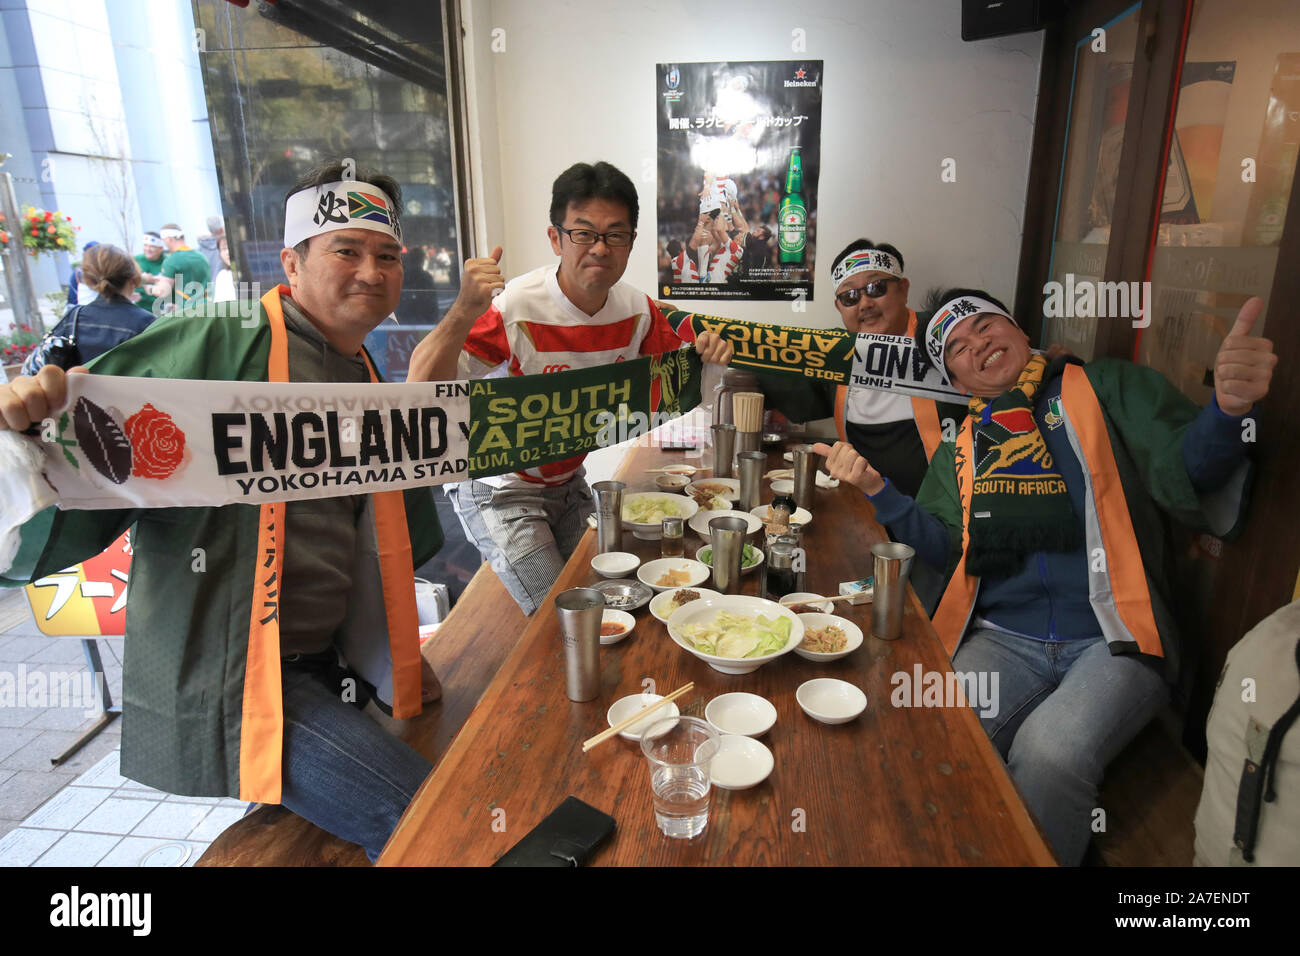 South Africa fans before the 2019 Rugby World Cup final match at Yokohama Stadium. Stock Photo